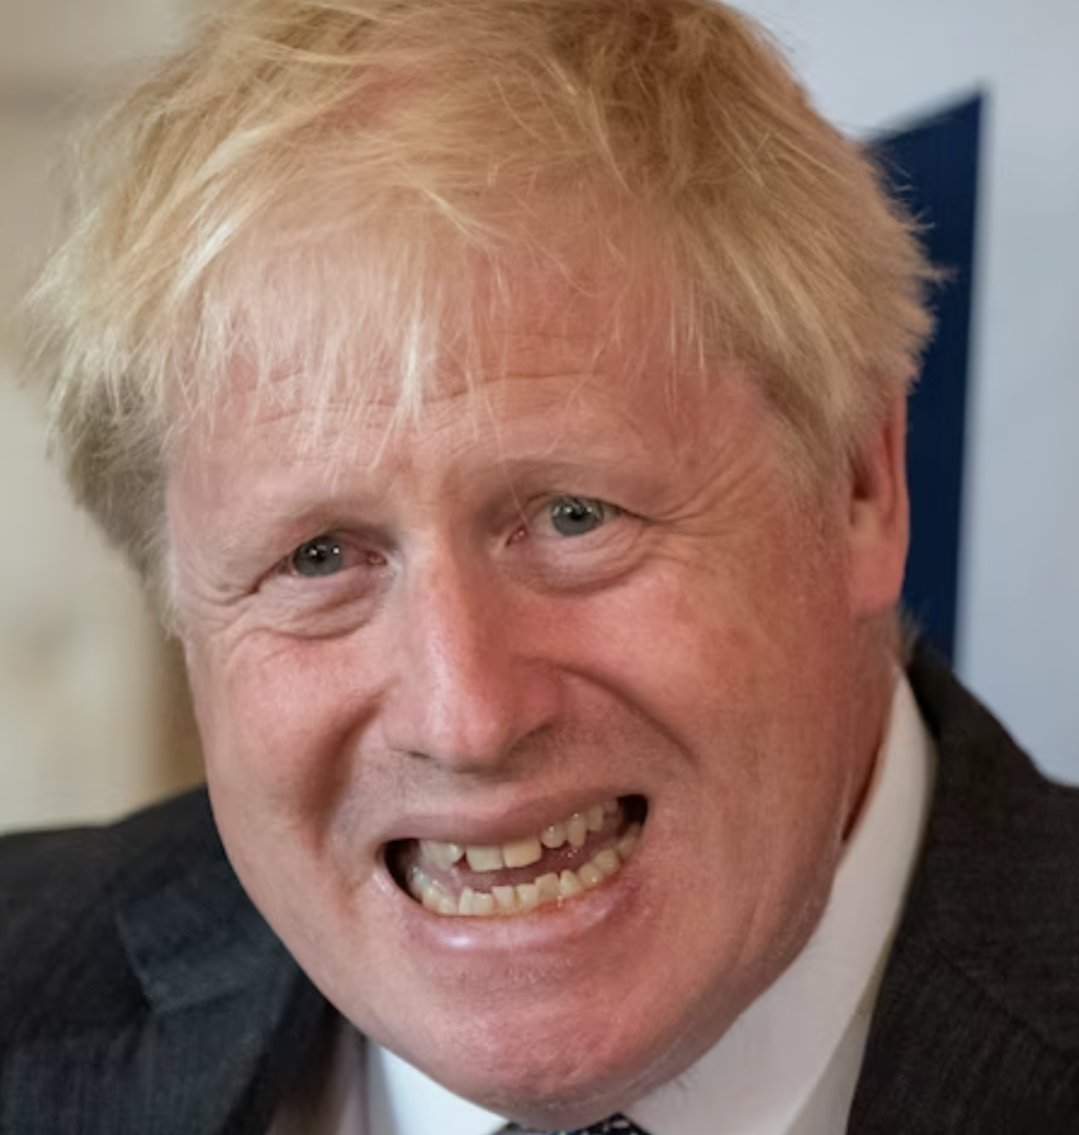 Boris Johnson was ultimately responsible for how quickly and aggressively COVID-19 swept onto the UK in 2020. The figures were  comparatively shocking on an international level. Lives could have been saved. Borders left open. We were sitting ducks. #BorisLiedPeopleDied